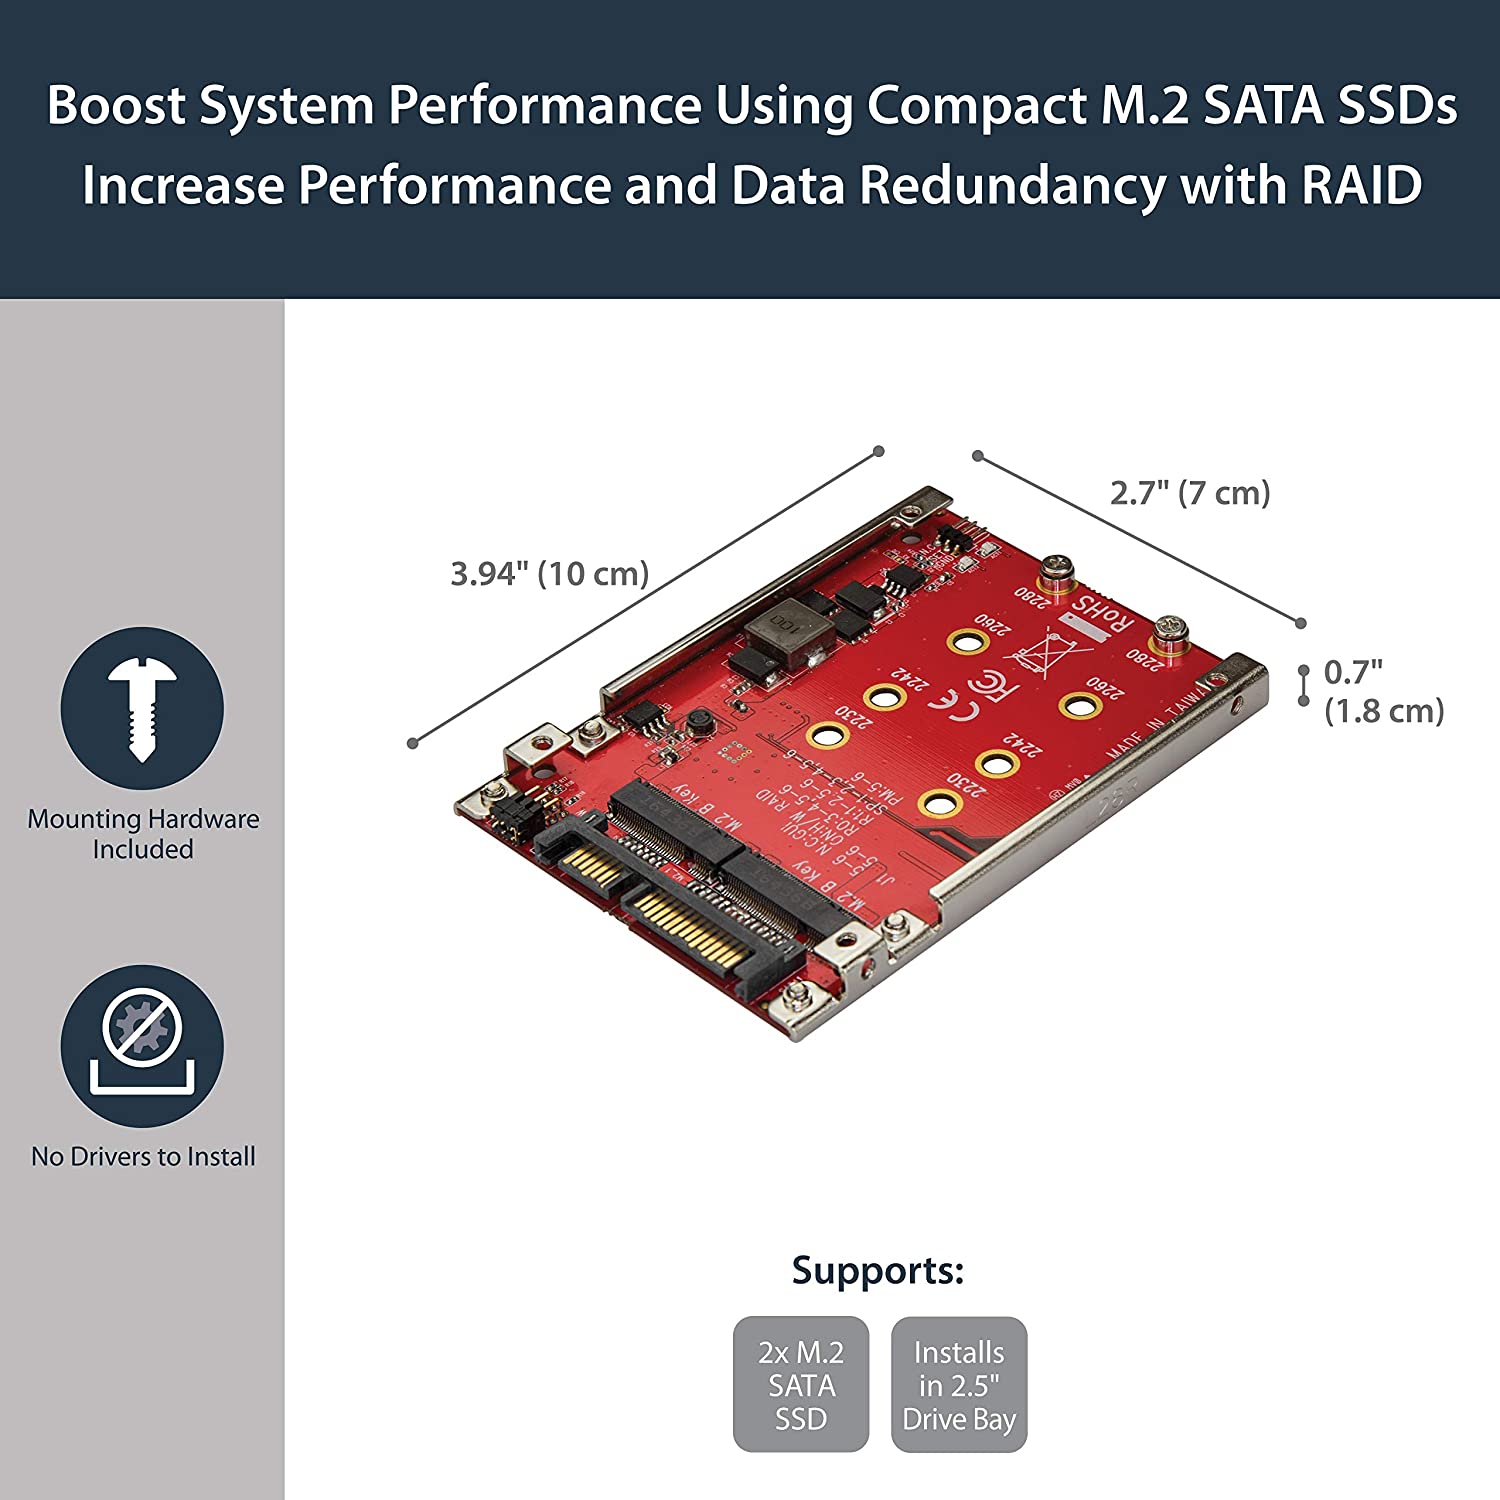 StarTech.com M.2 to SATA Adapter - Dual Slot - for 2.5in Drive Bay - RAID - M.2 SSD - M.2 Adapter - M.2 SSD Adapter (S322M225R) - e4cents